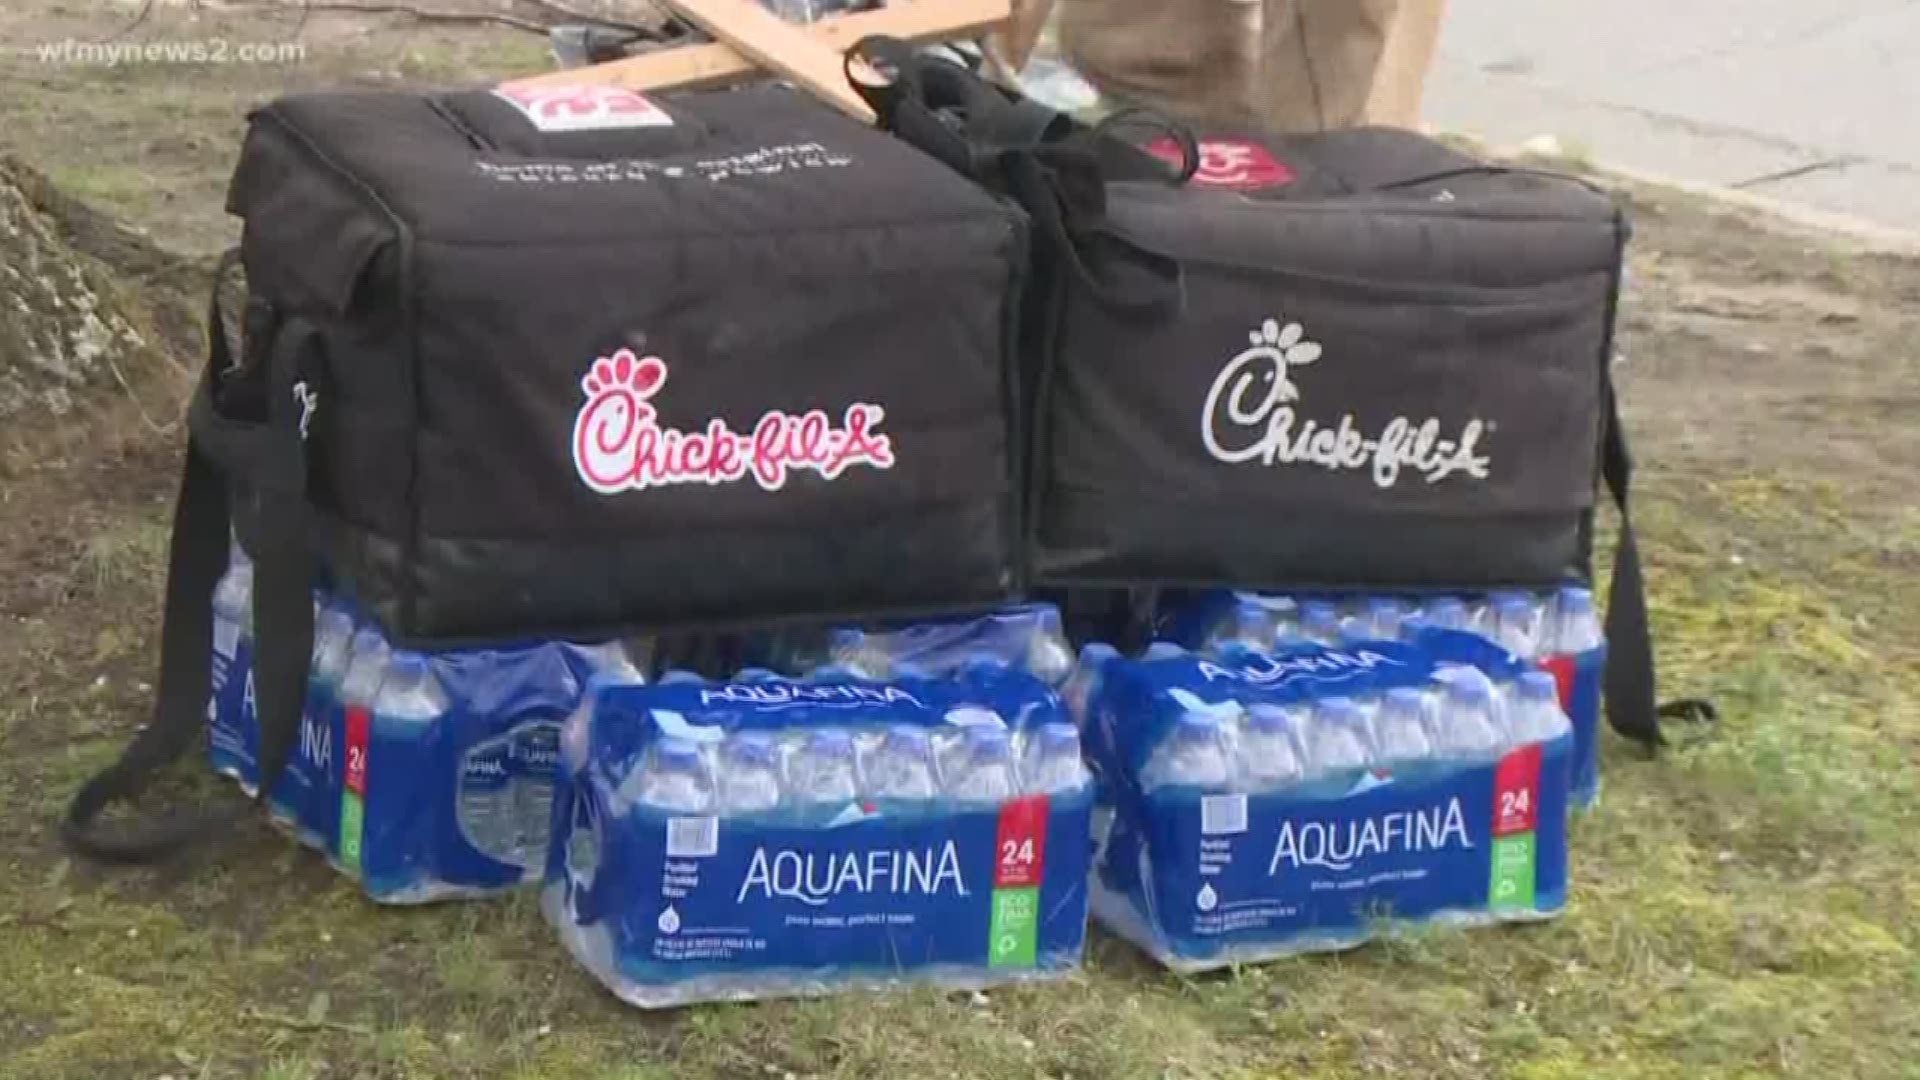 #2Cares: Chick-fil-A Donates Sandwiches To Storm Victims